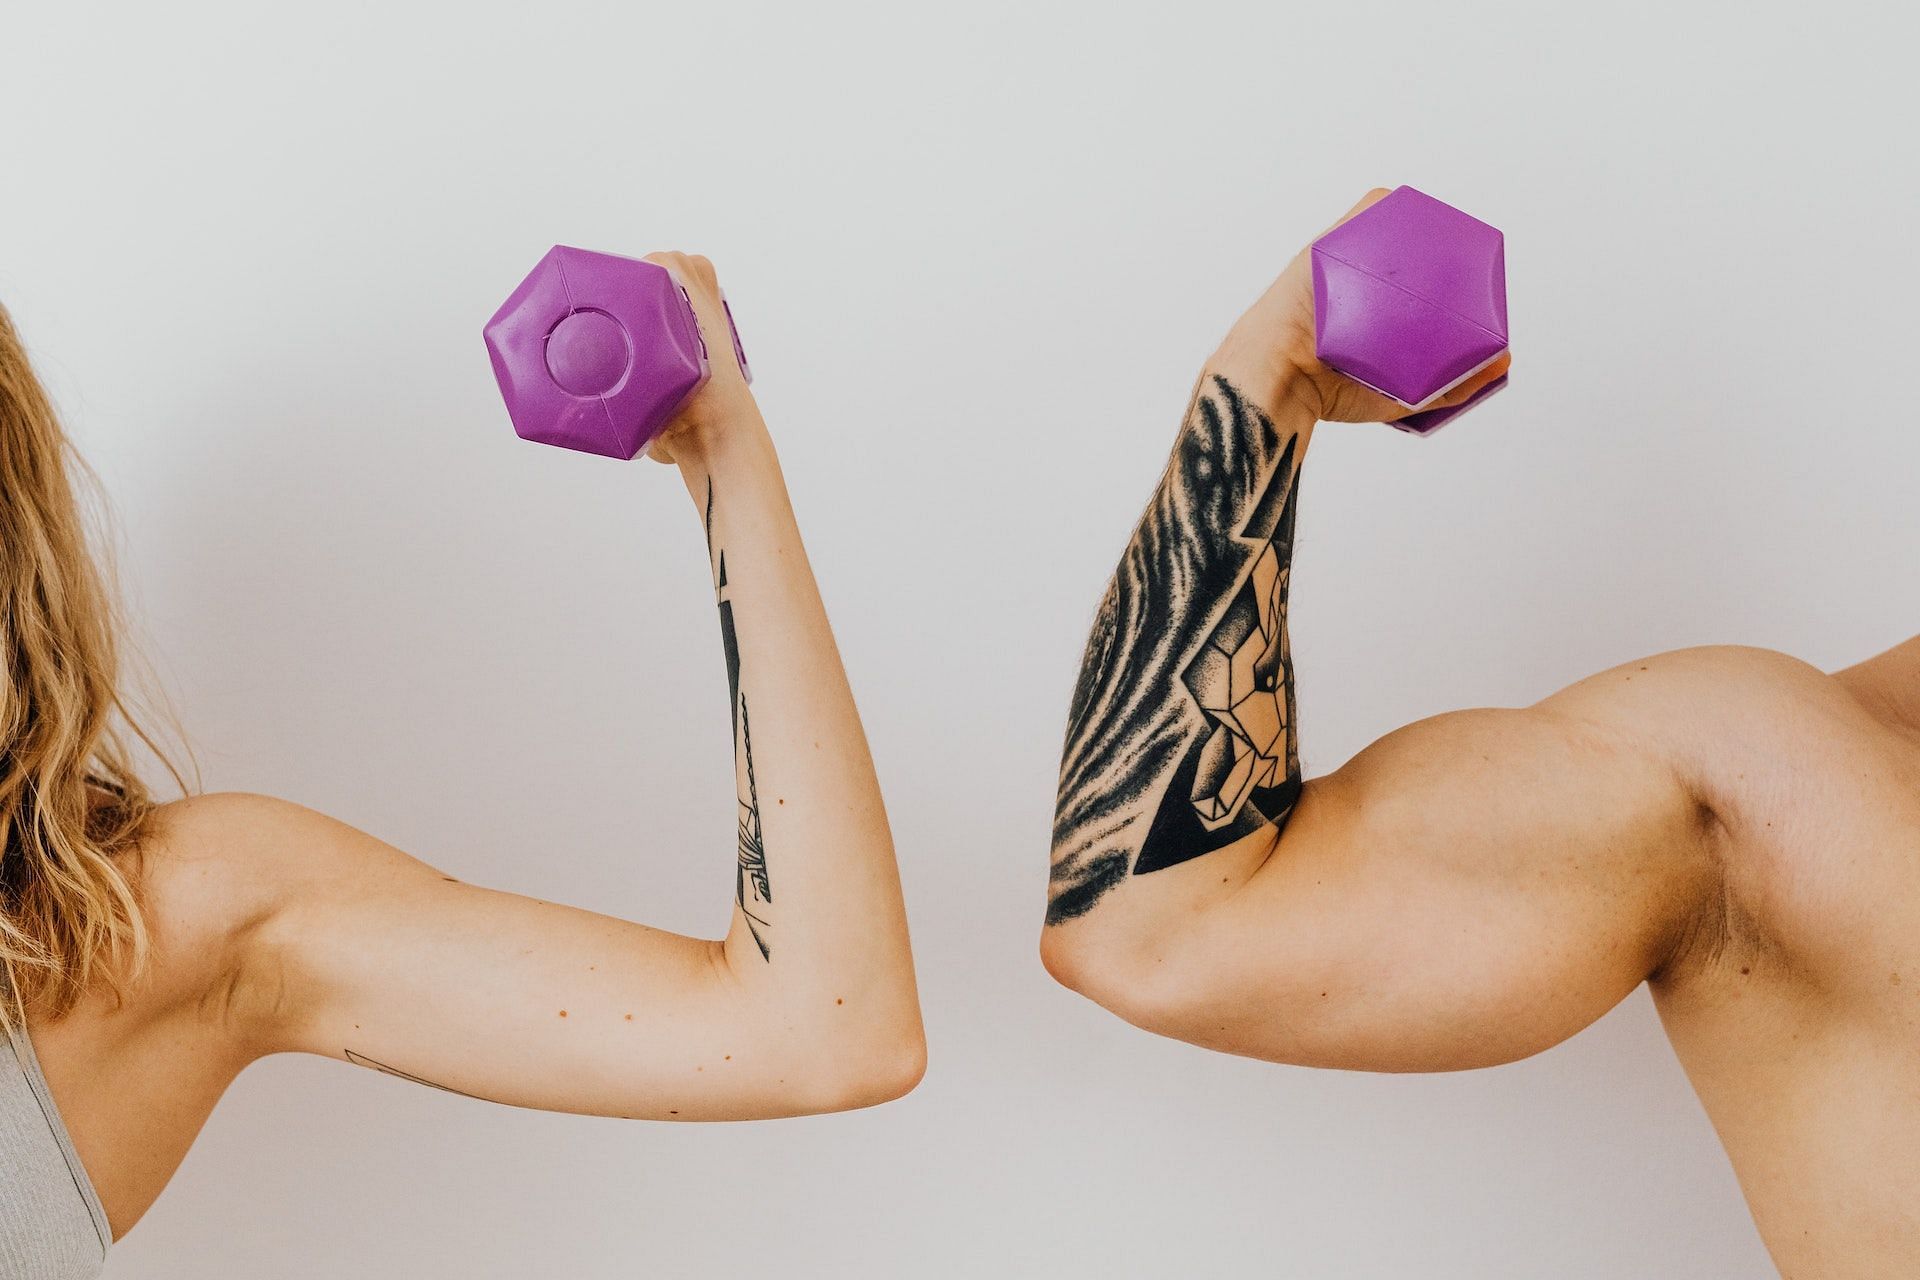 Biceps curls are a staple arm workouts with weights. (Photo via Pexels/Karolina Grabowska)